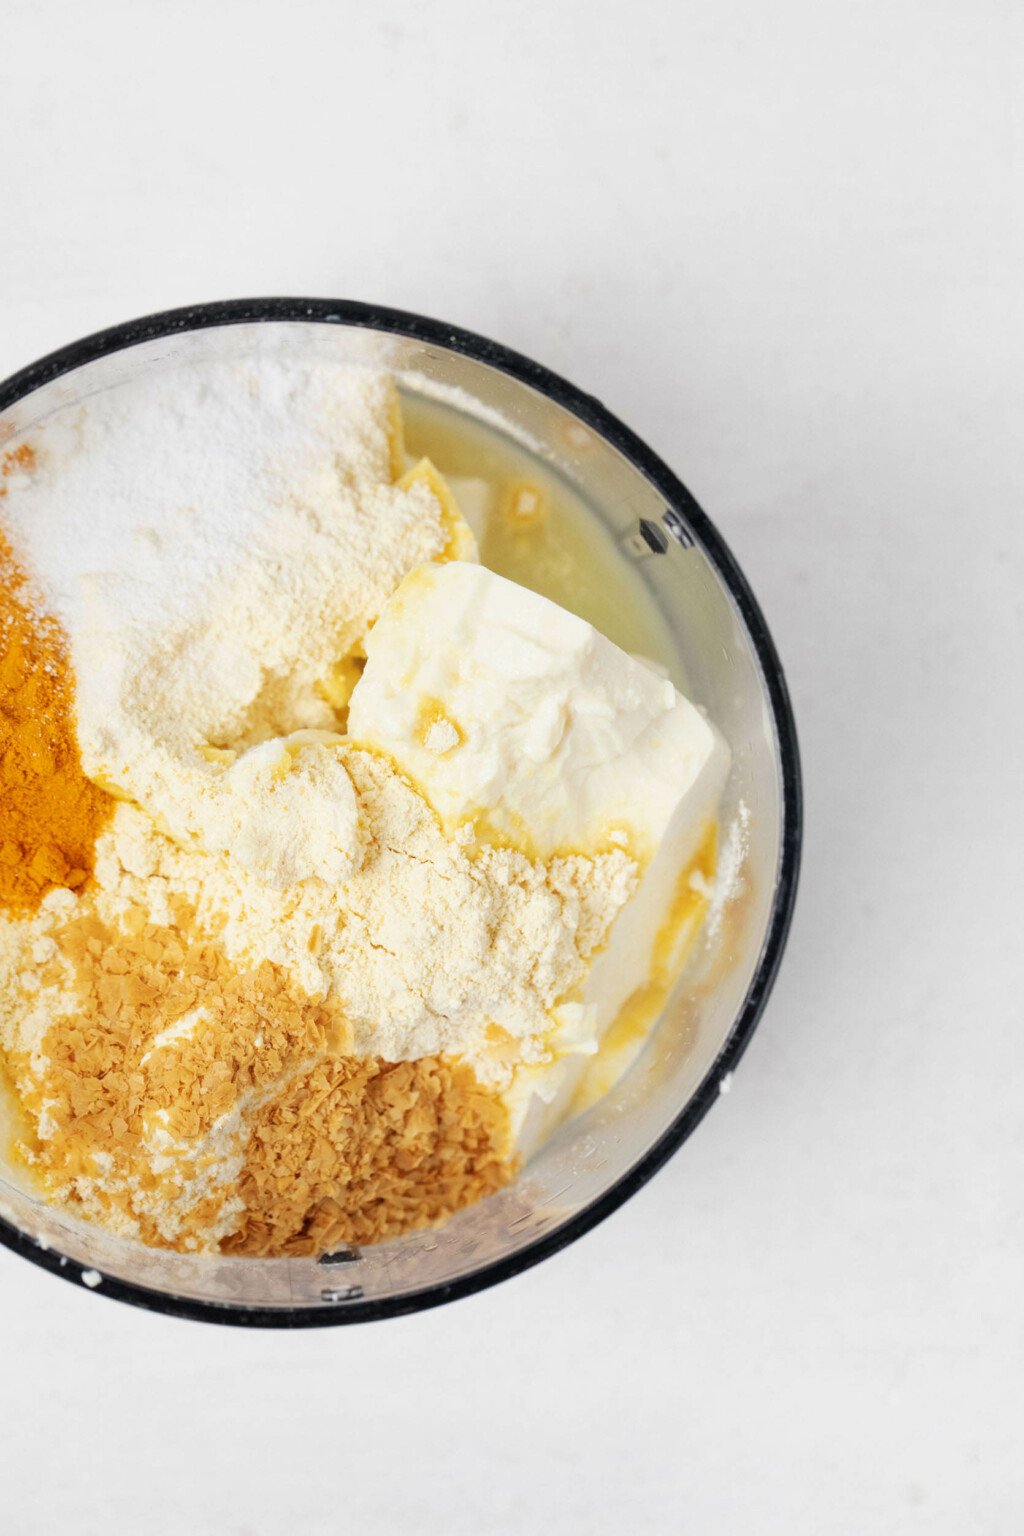 The clear bowl of a food processor holds the components for a homemade, liquid vegan egg, including tofu and flour and spices.